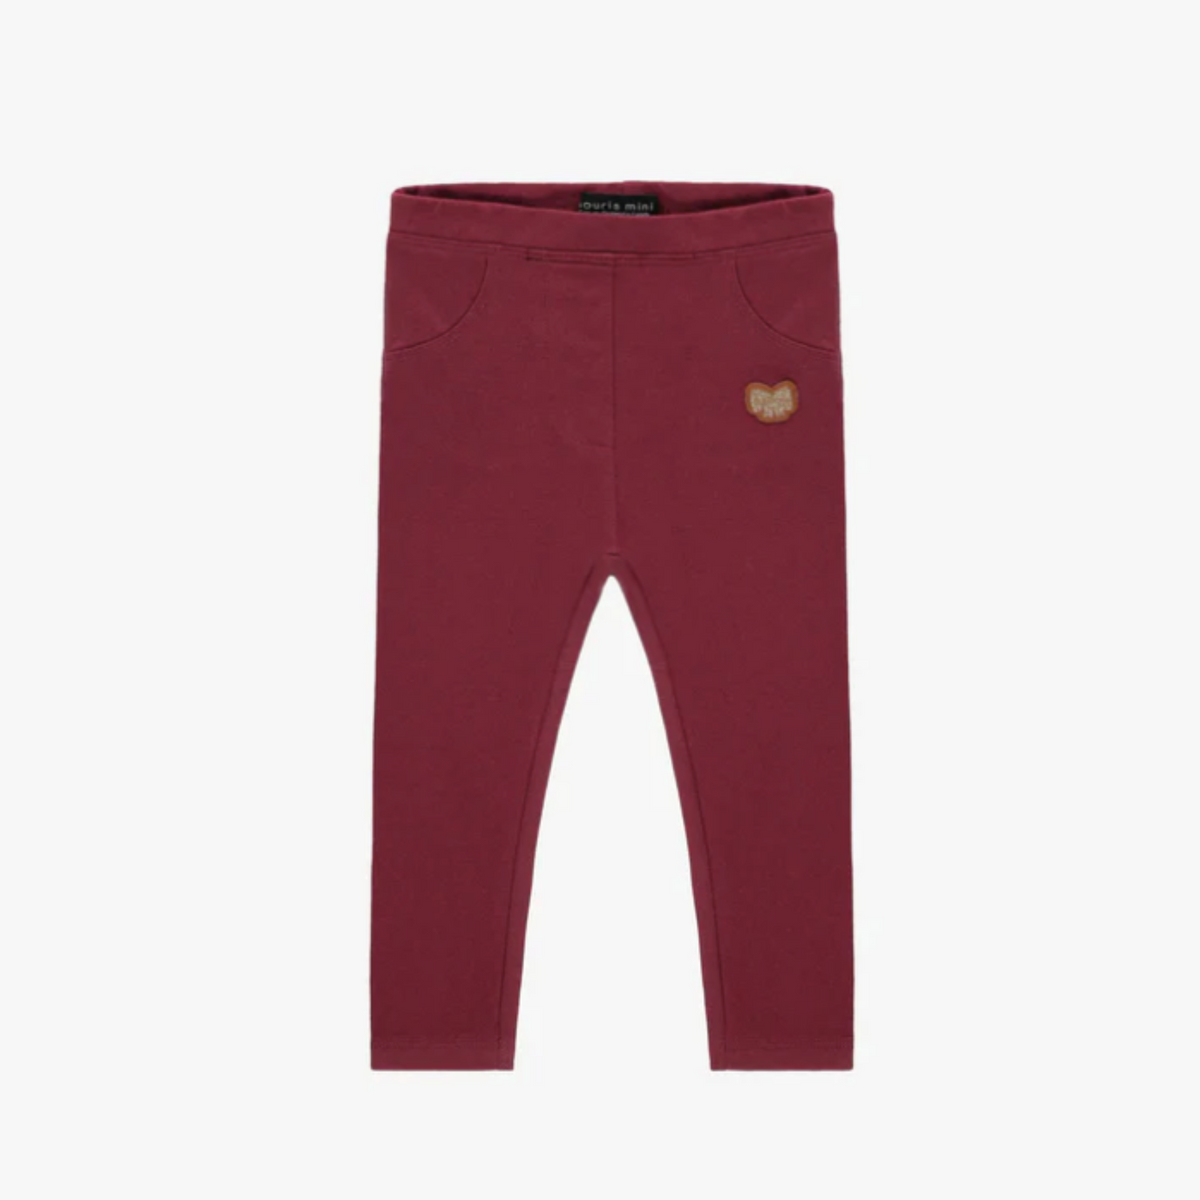 Red Legging with Pockets in Soft Jersey, Toddler